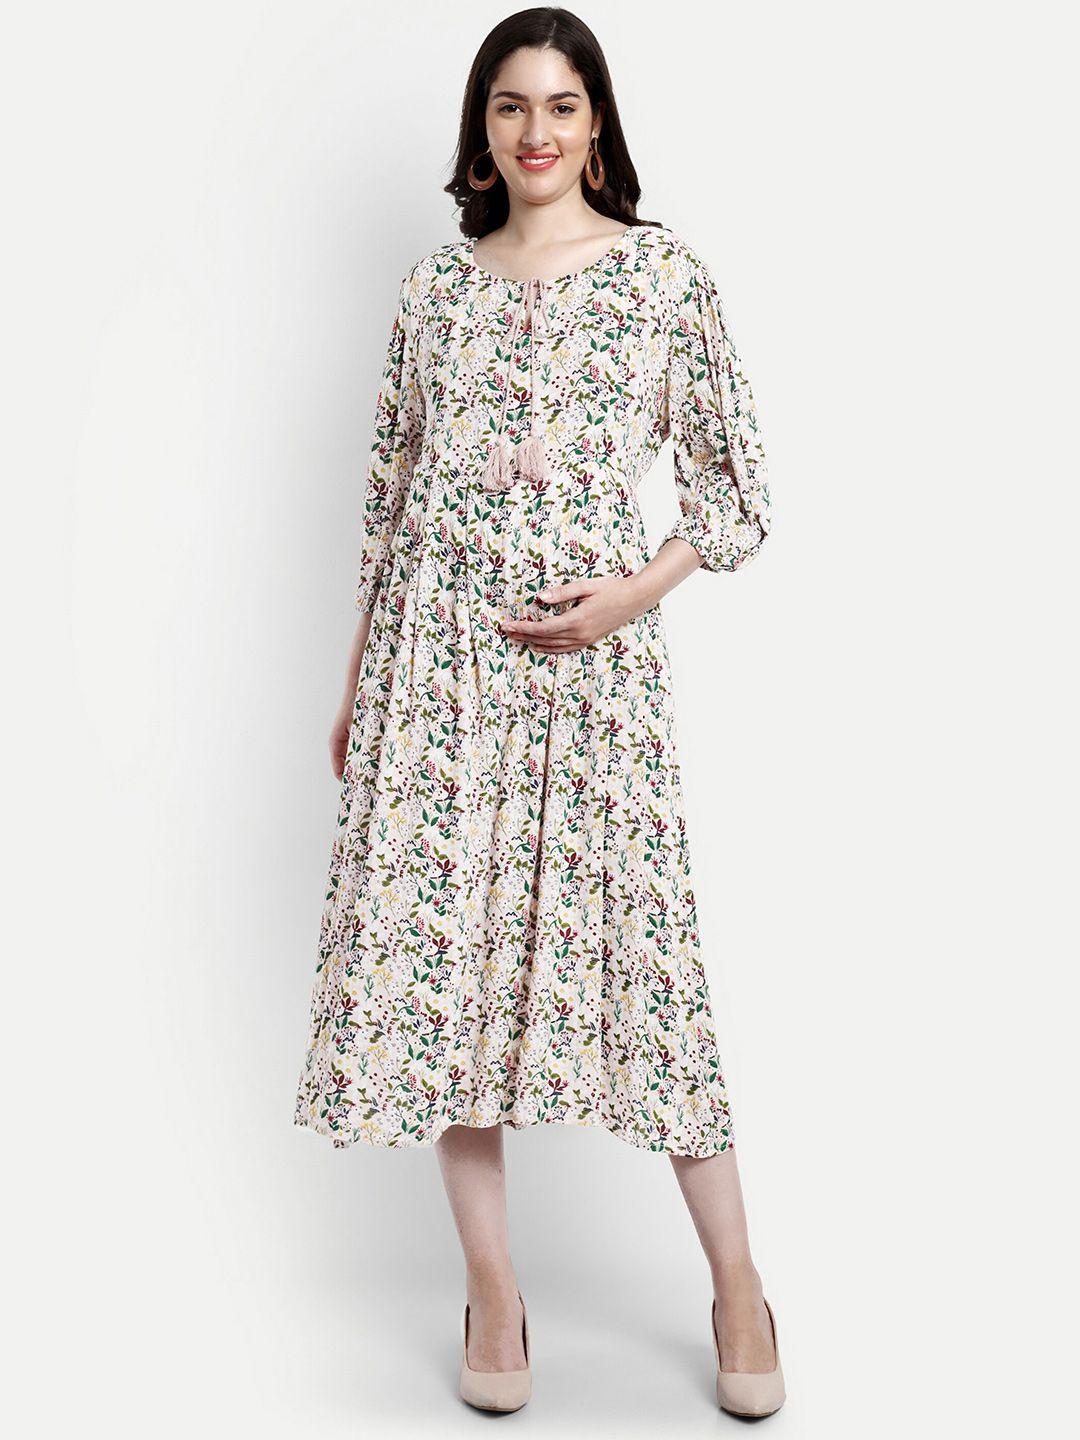 aaruvi ruchi verma floral printed tie-up neck maternity fit & flare midi dress